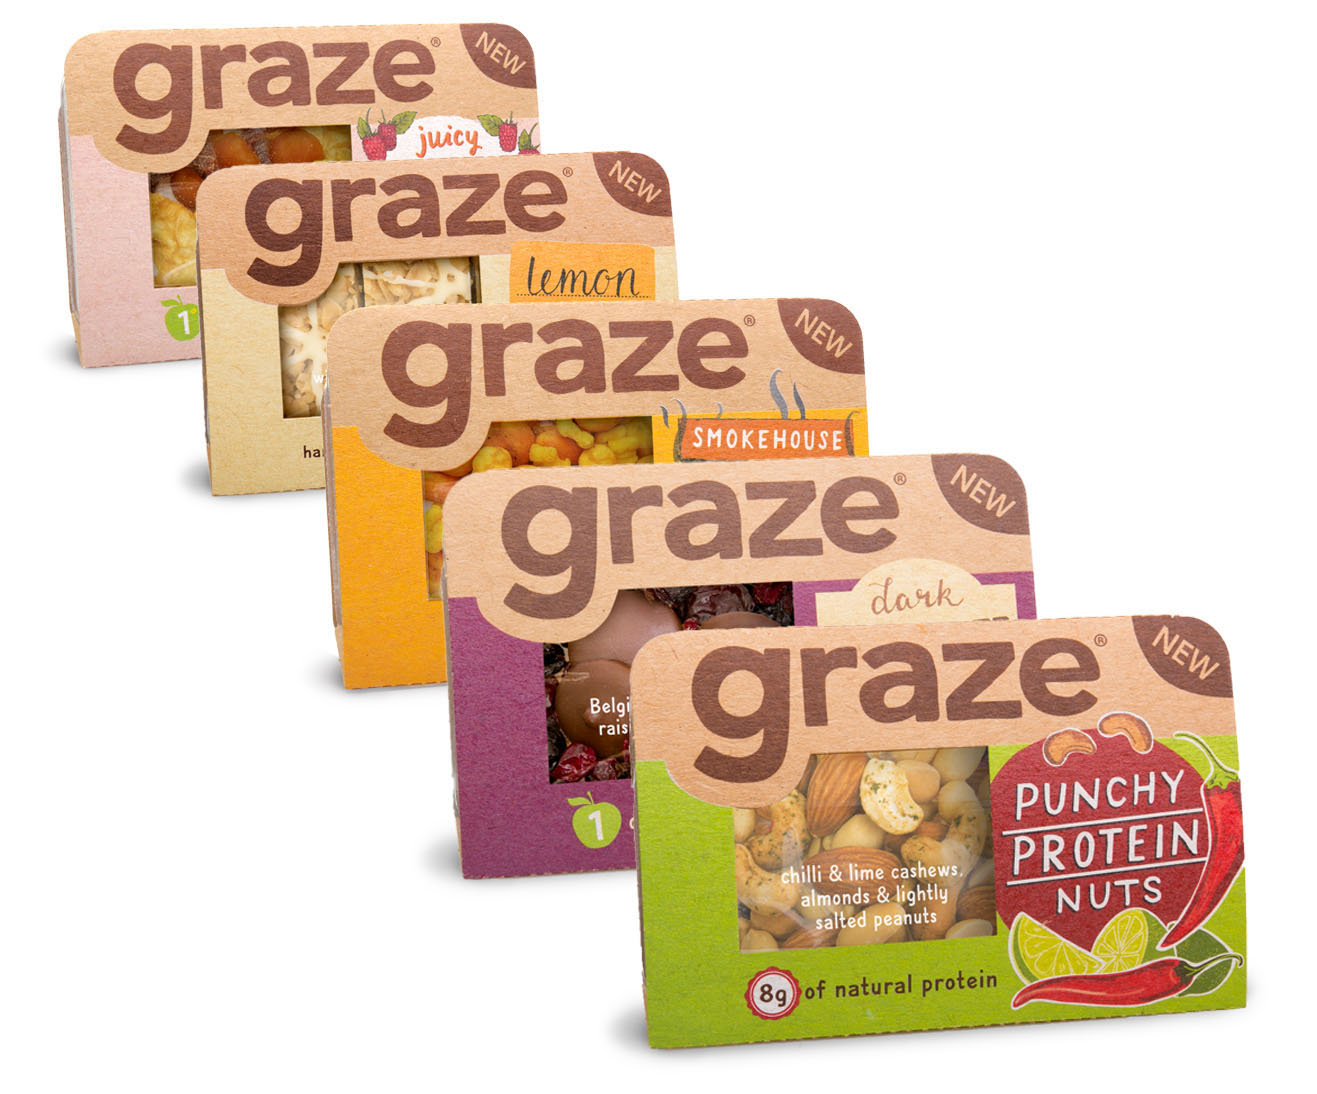 Photo: Graze snack for the retail channel